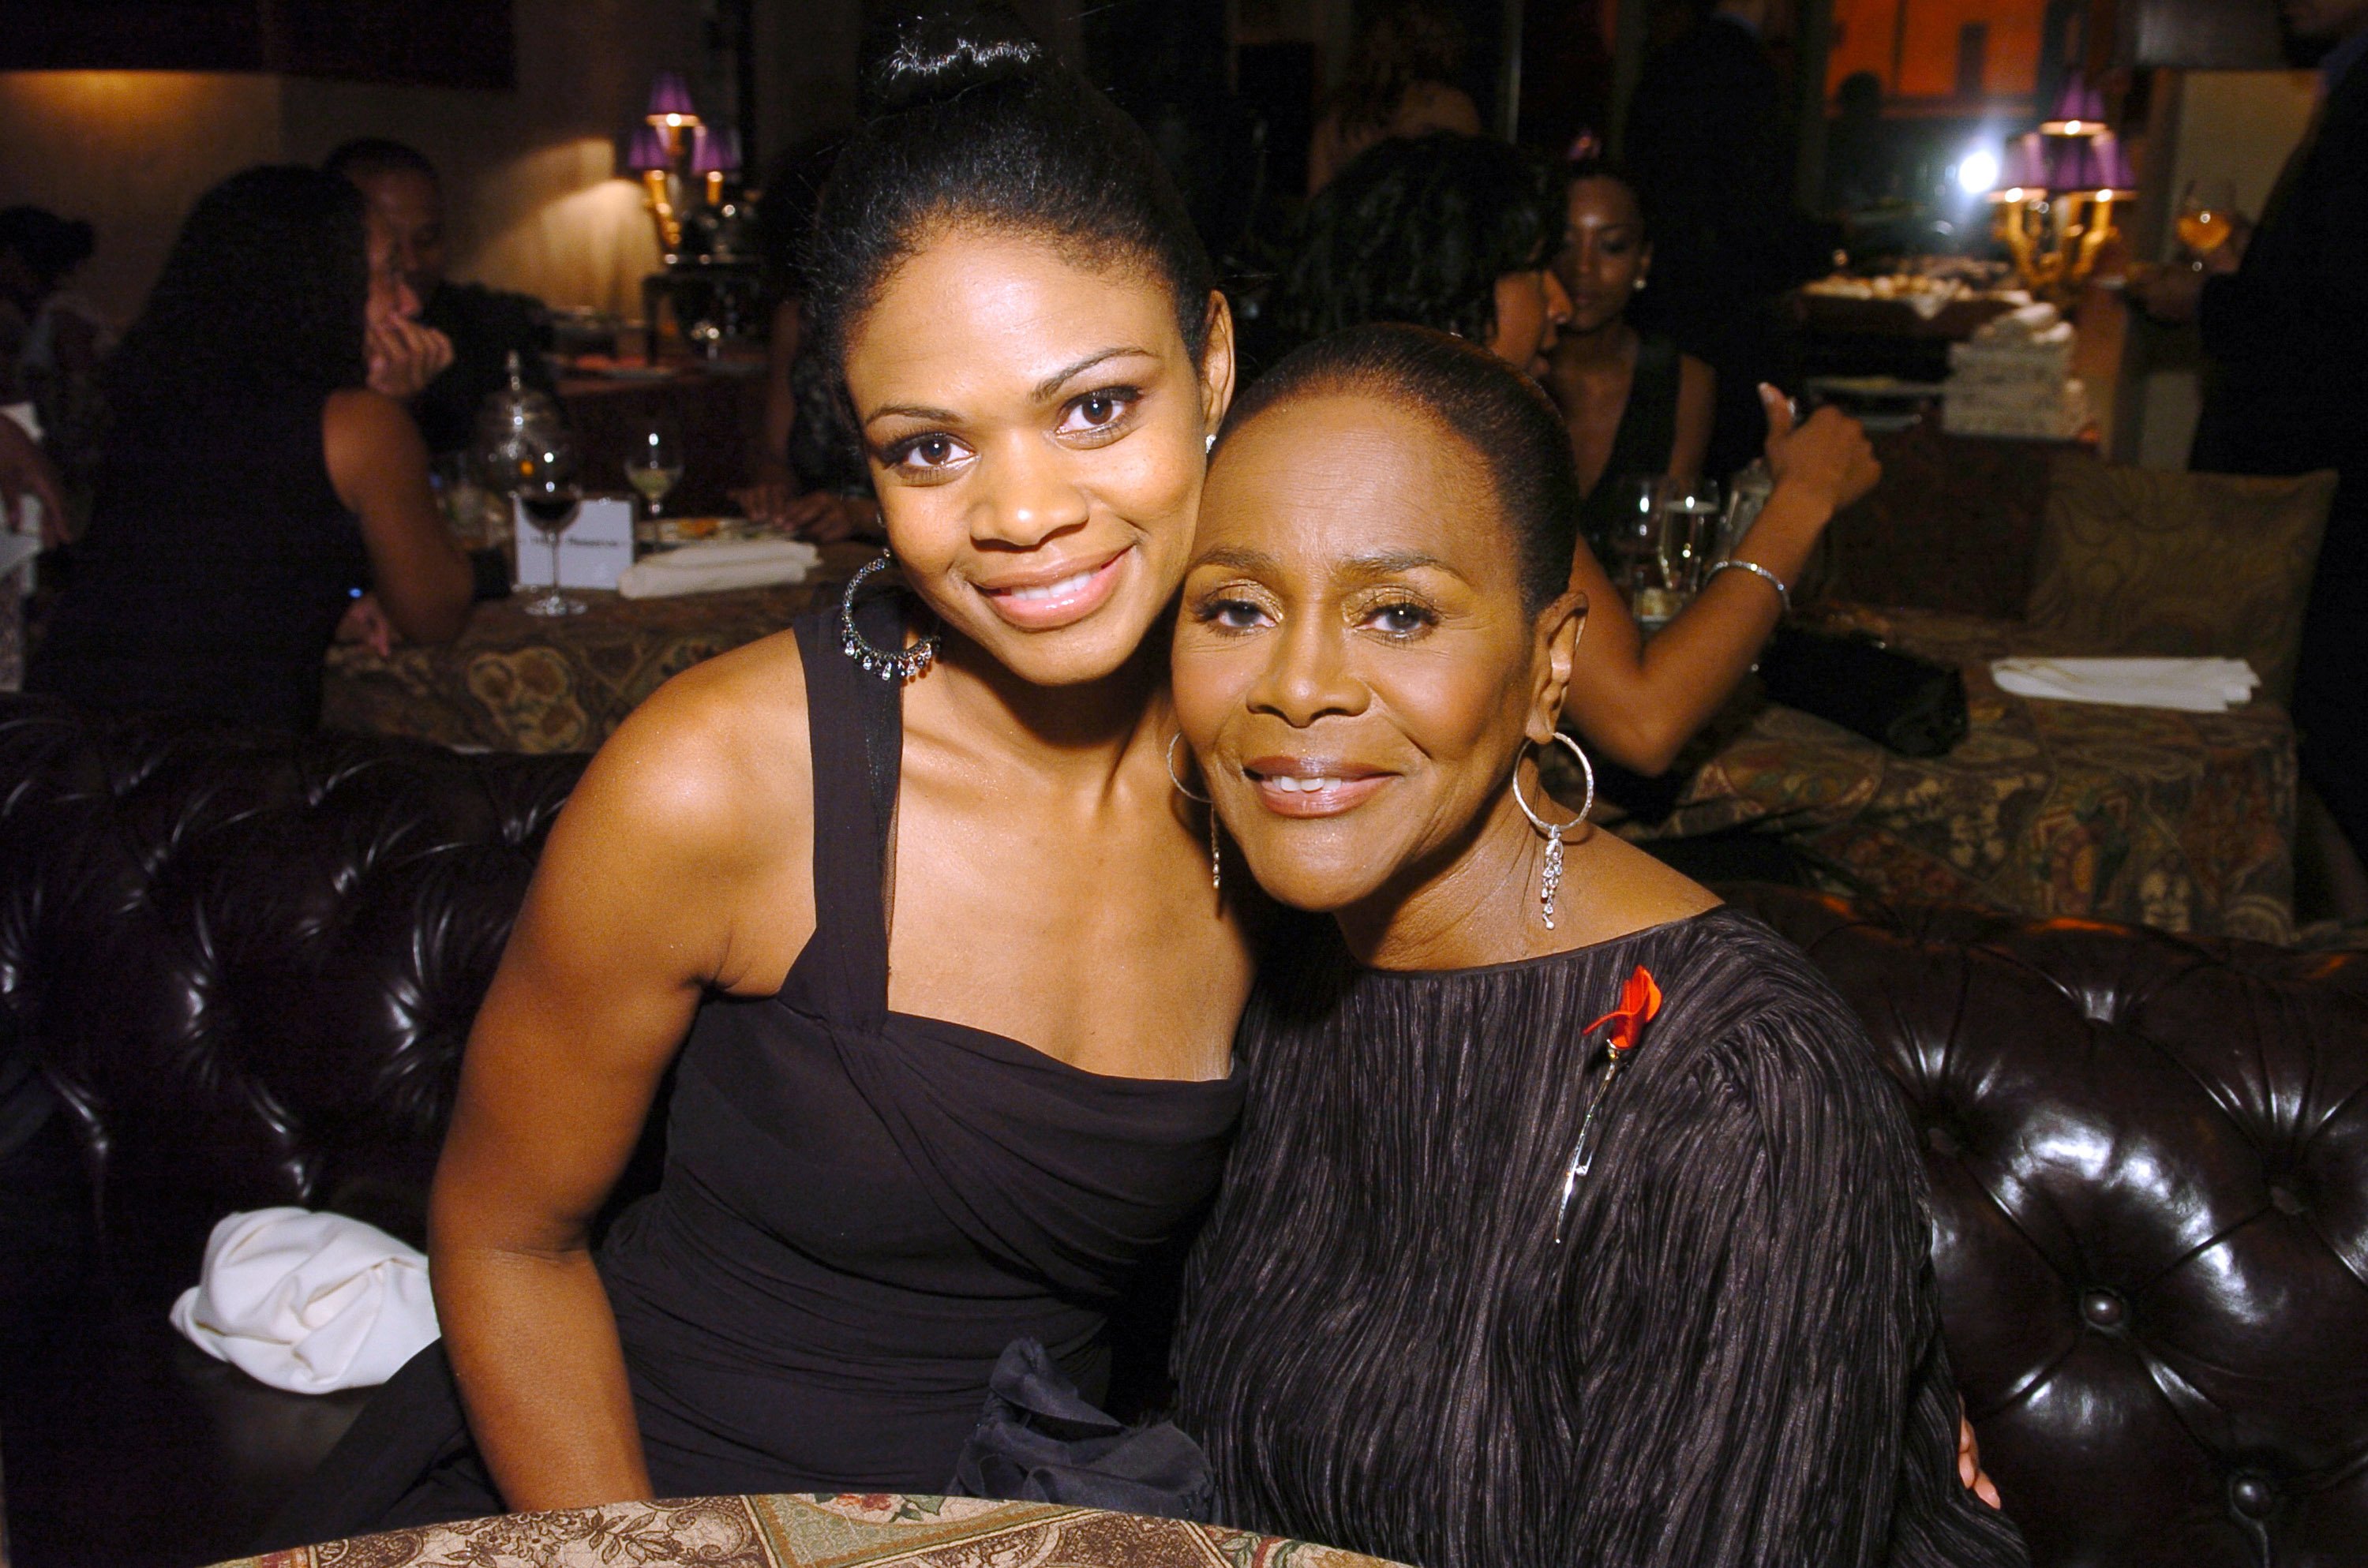 Kimberly Elise and Cicely Tyson smiling while wearing black dresses.